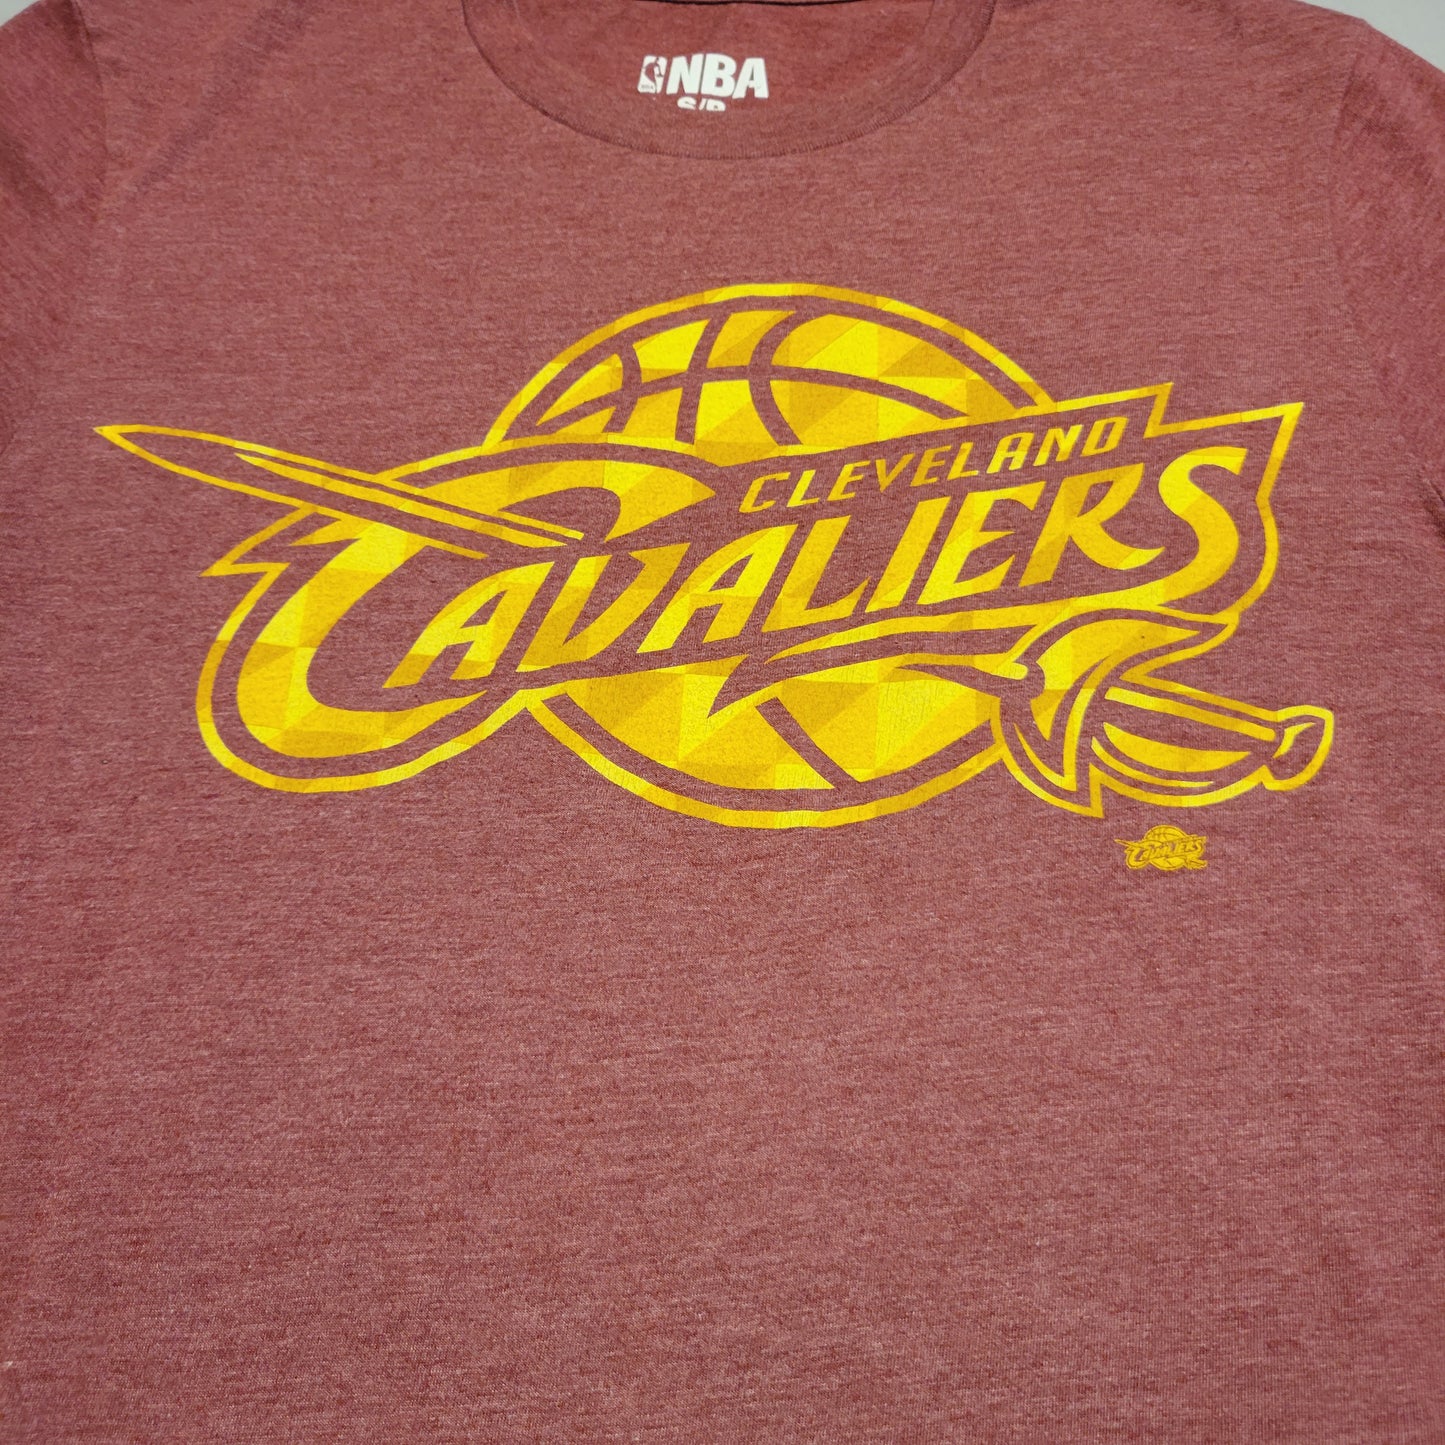 Pre-Owned Men's Small (S) NBA Cleveland Cavaliers T-shirt